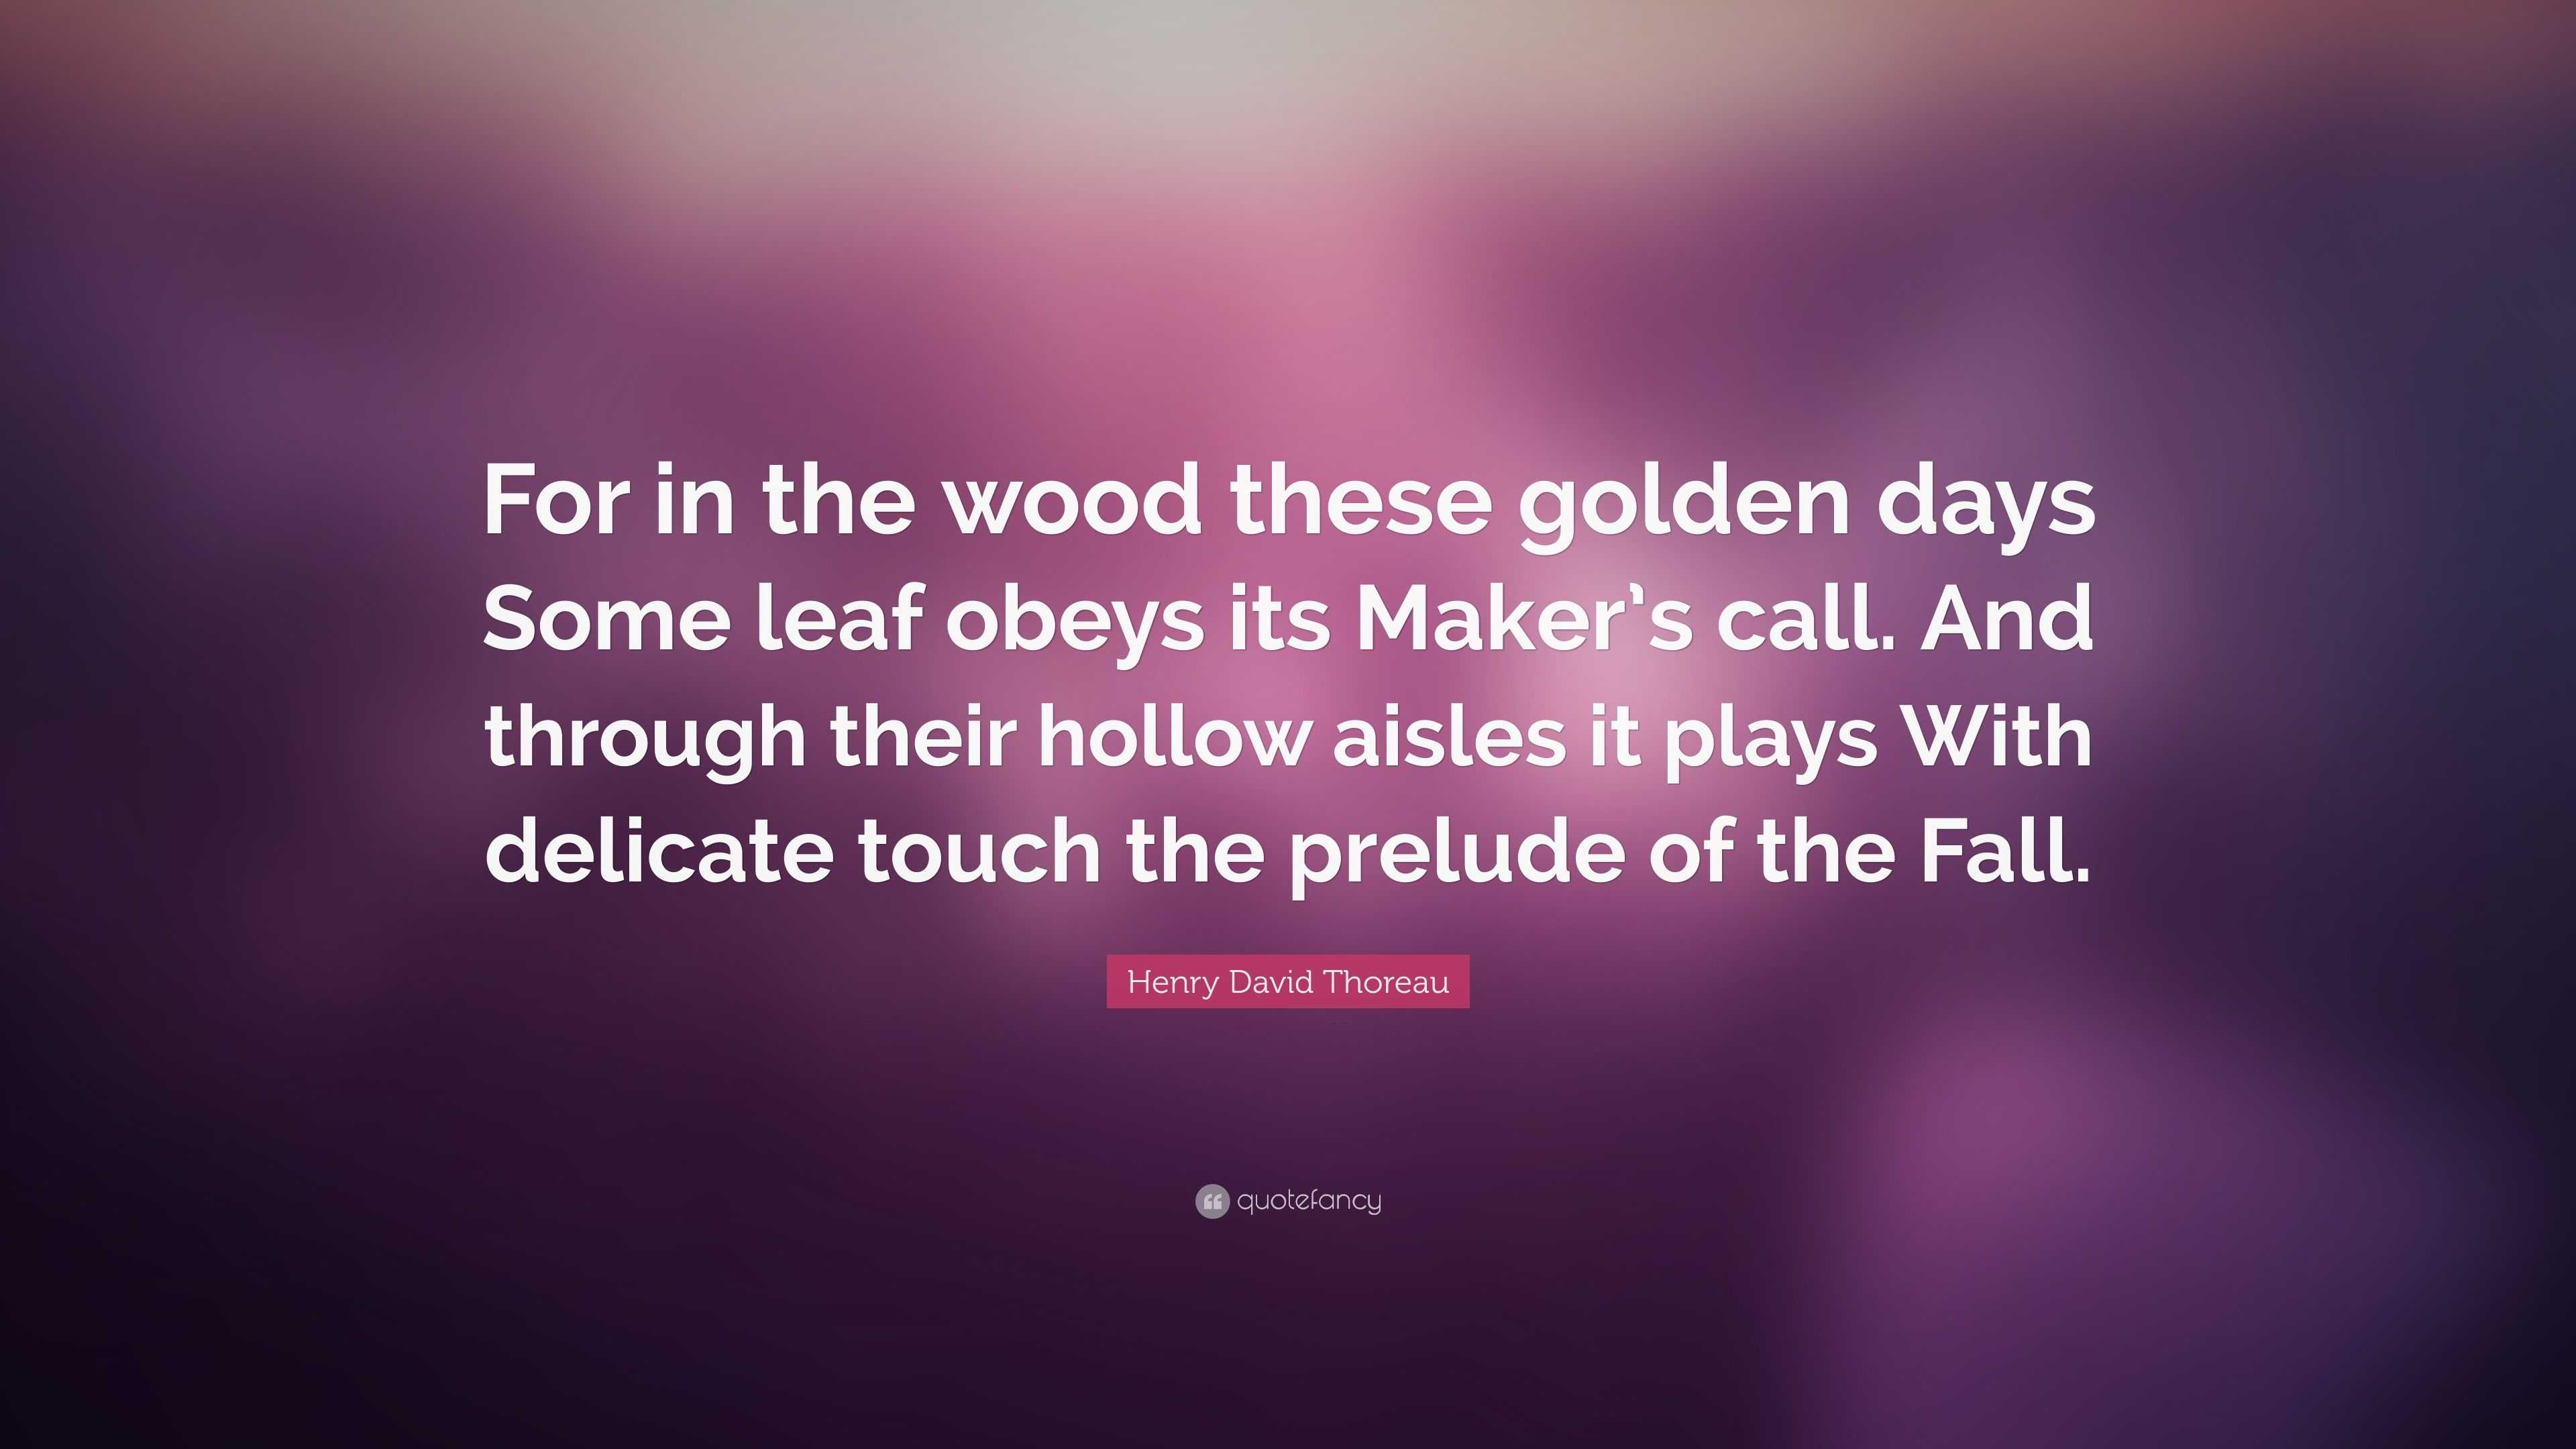 Henry David Thoreau Quote: “For in the wood these golden days Some